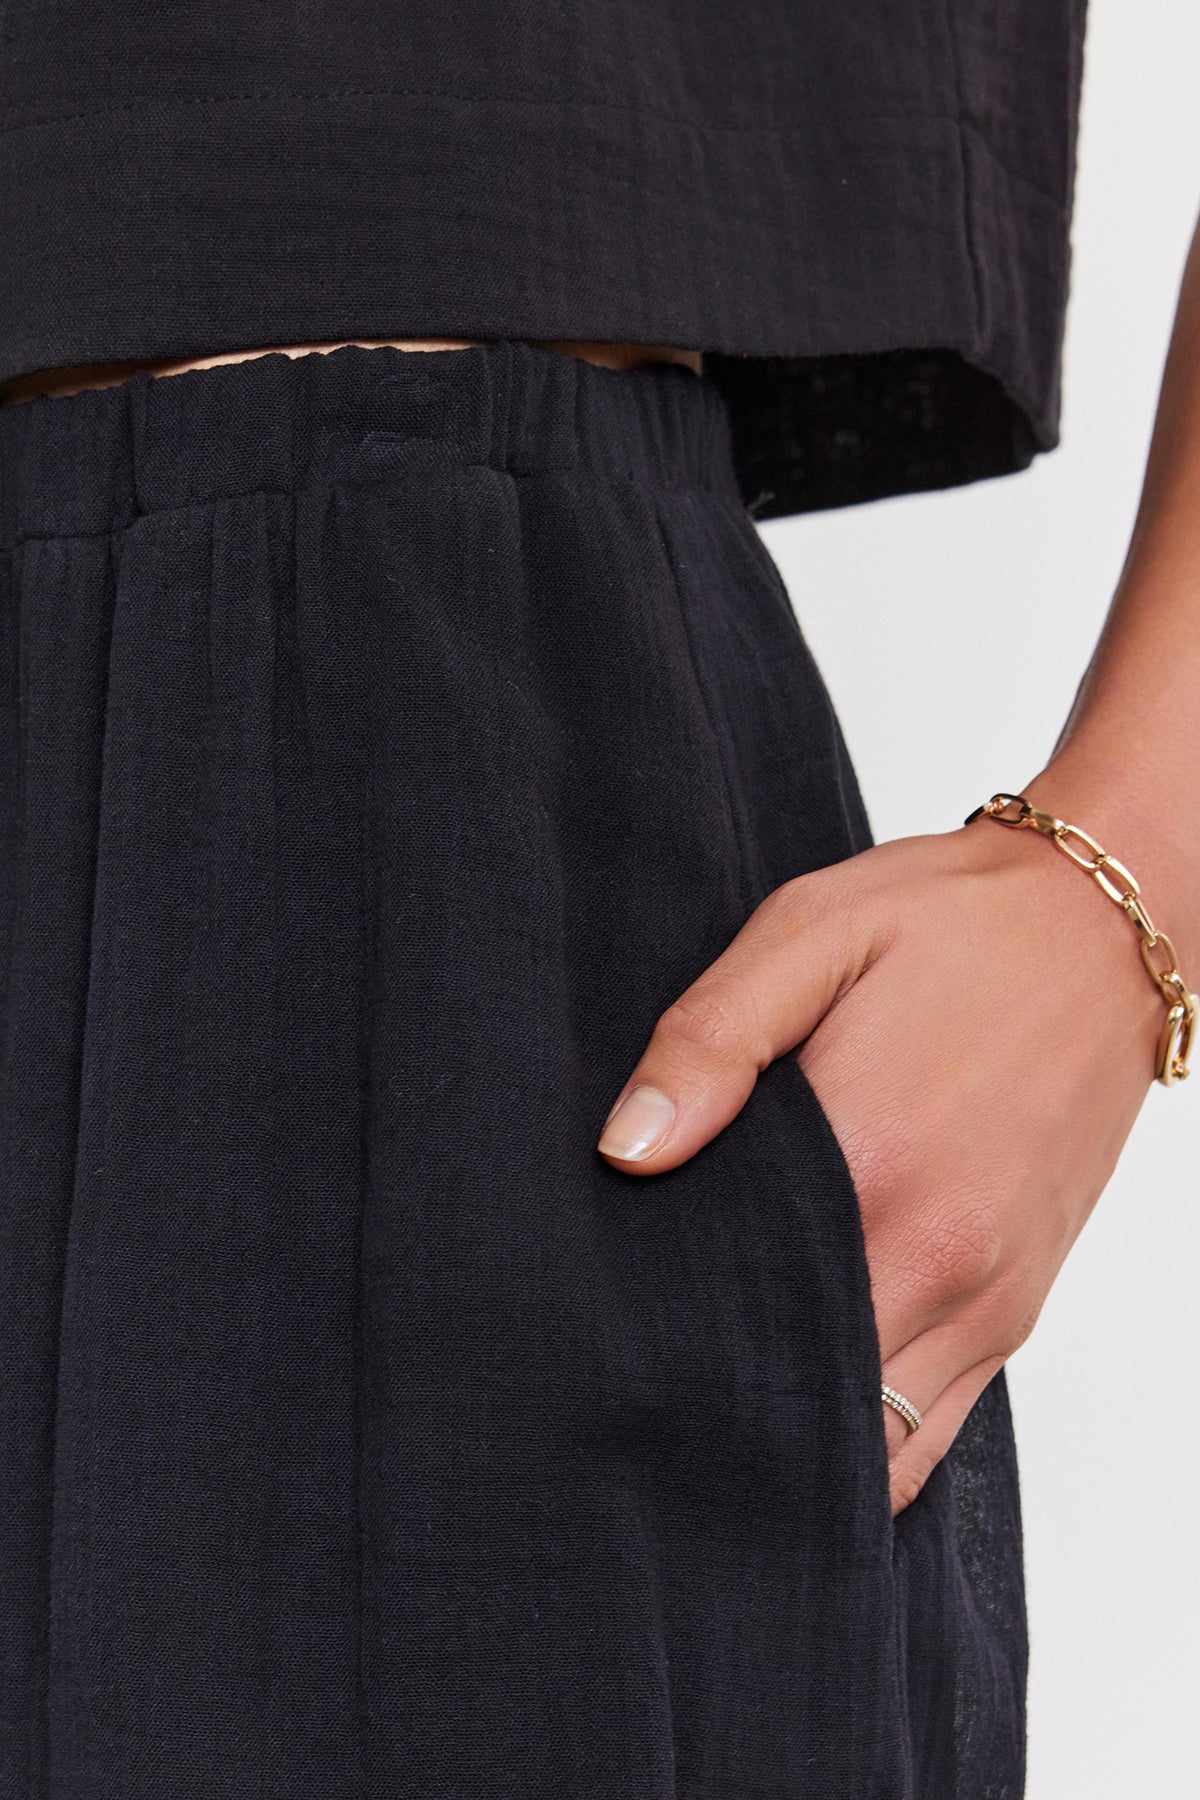   Close-up of a woman's hand with a gold bracelet and rings, resting on her Velvet by Graham & Spencer INDY COTTON GAUZE SKIRT. 